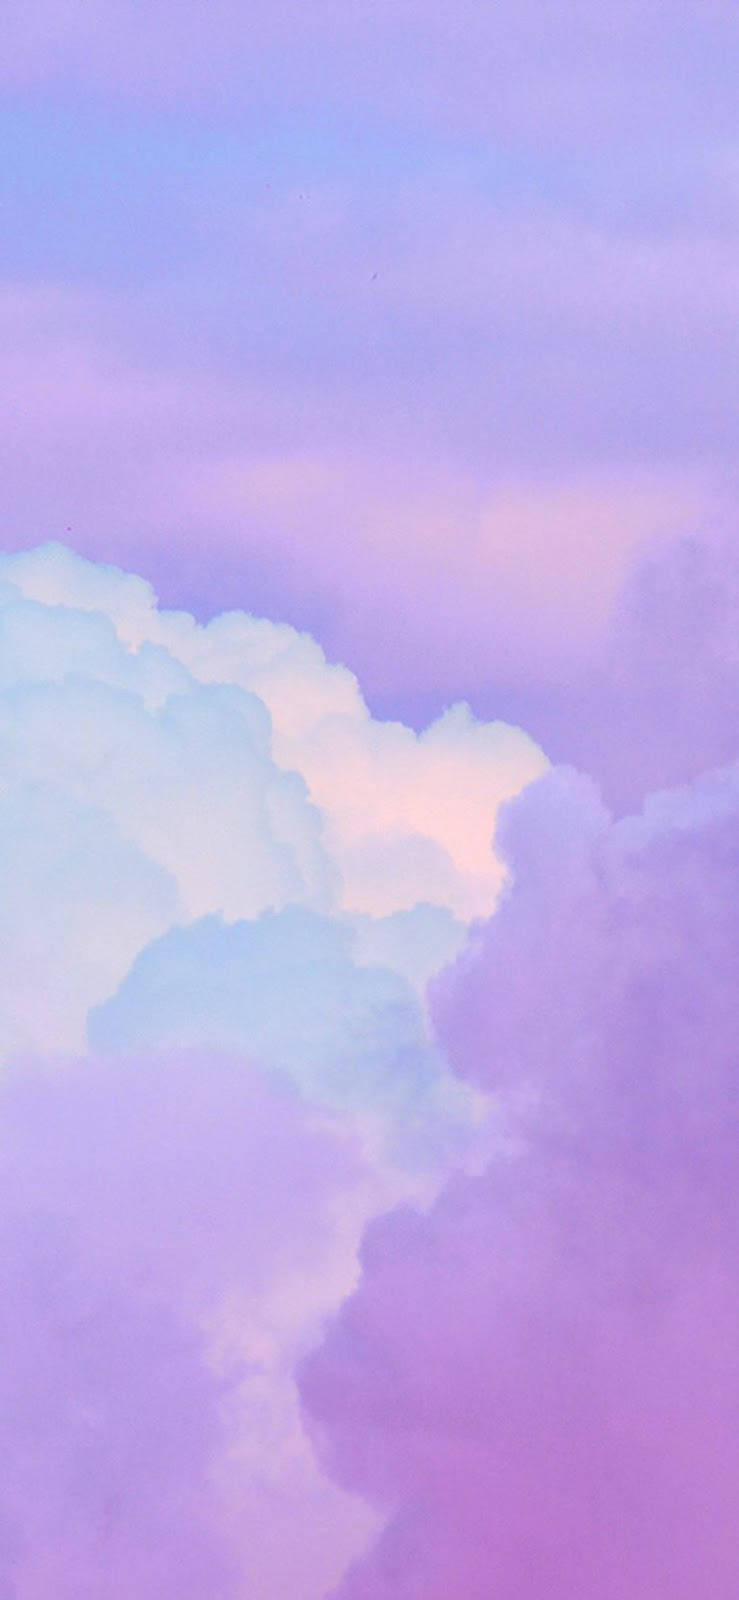 Download Aesthetic Purple Sky For iPhone Wallpaper